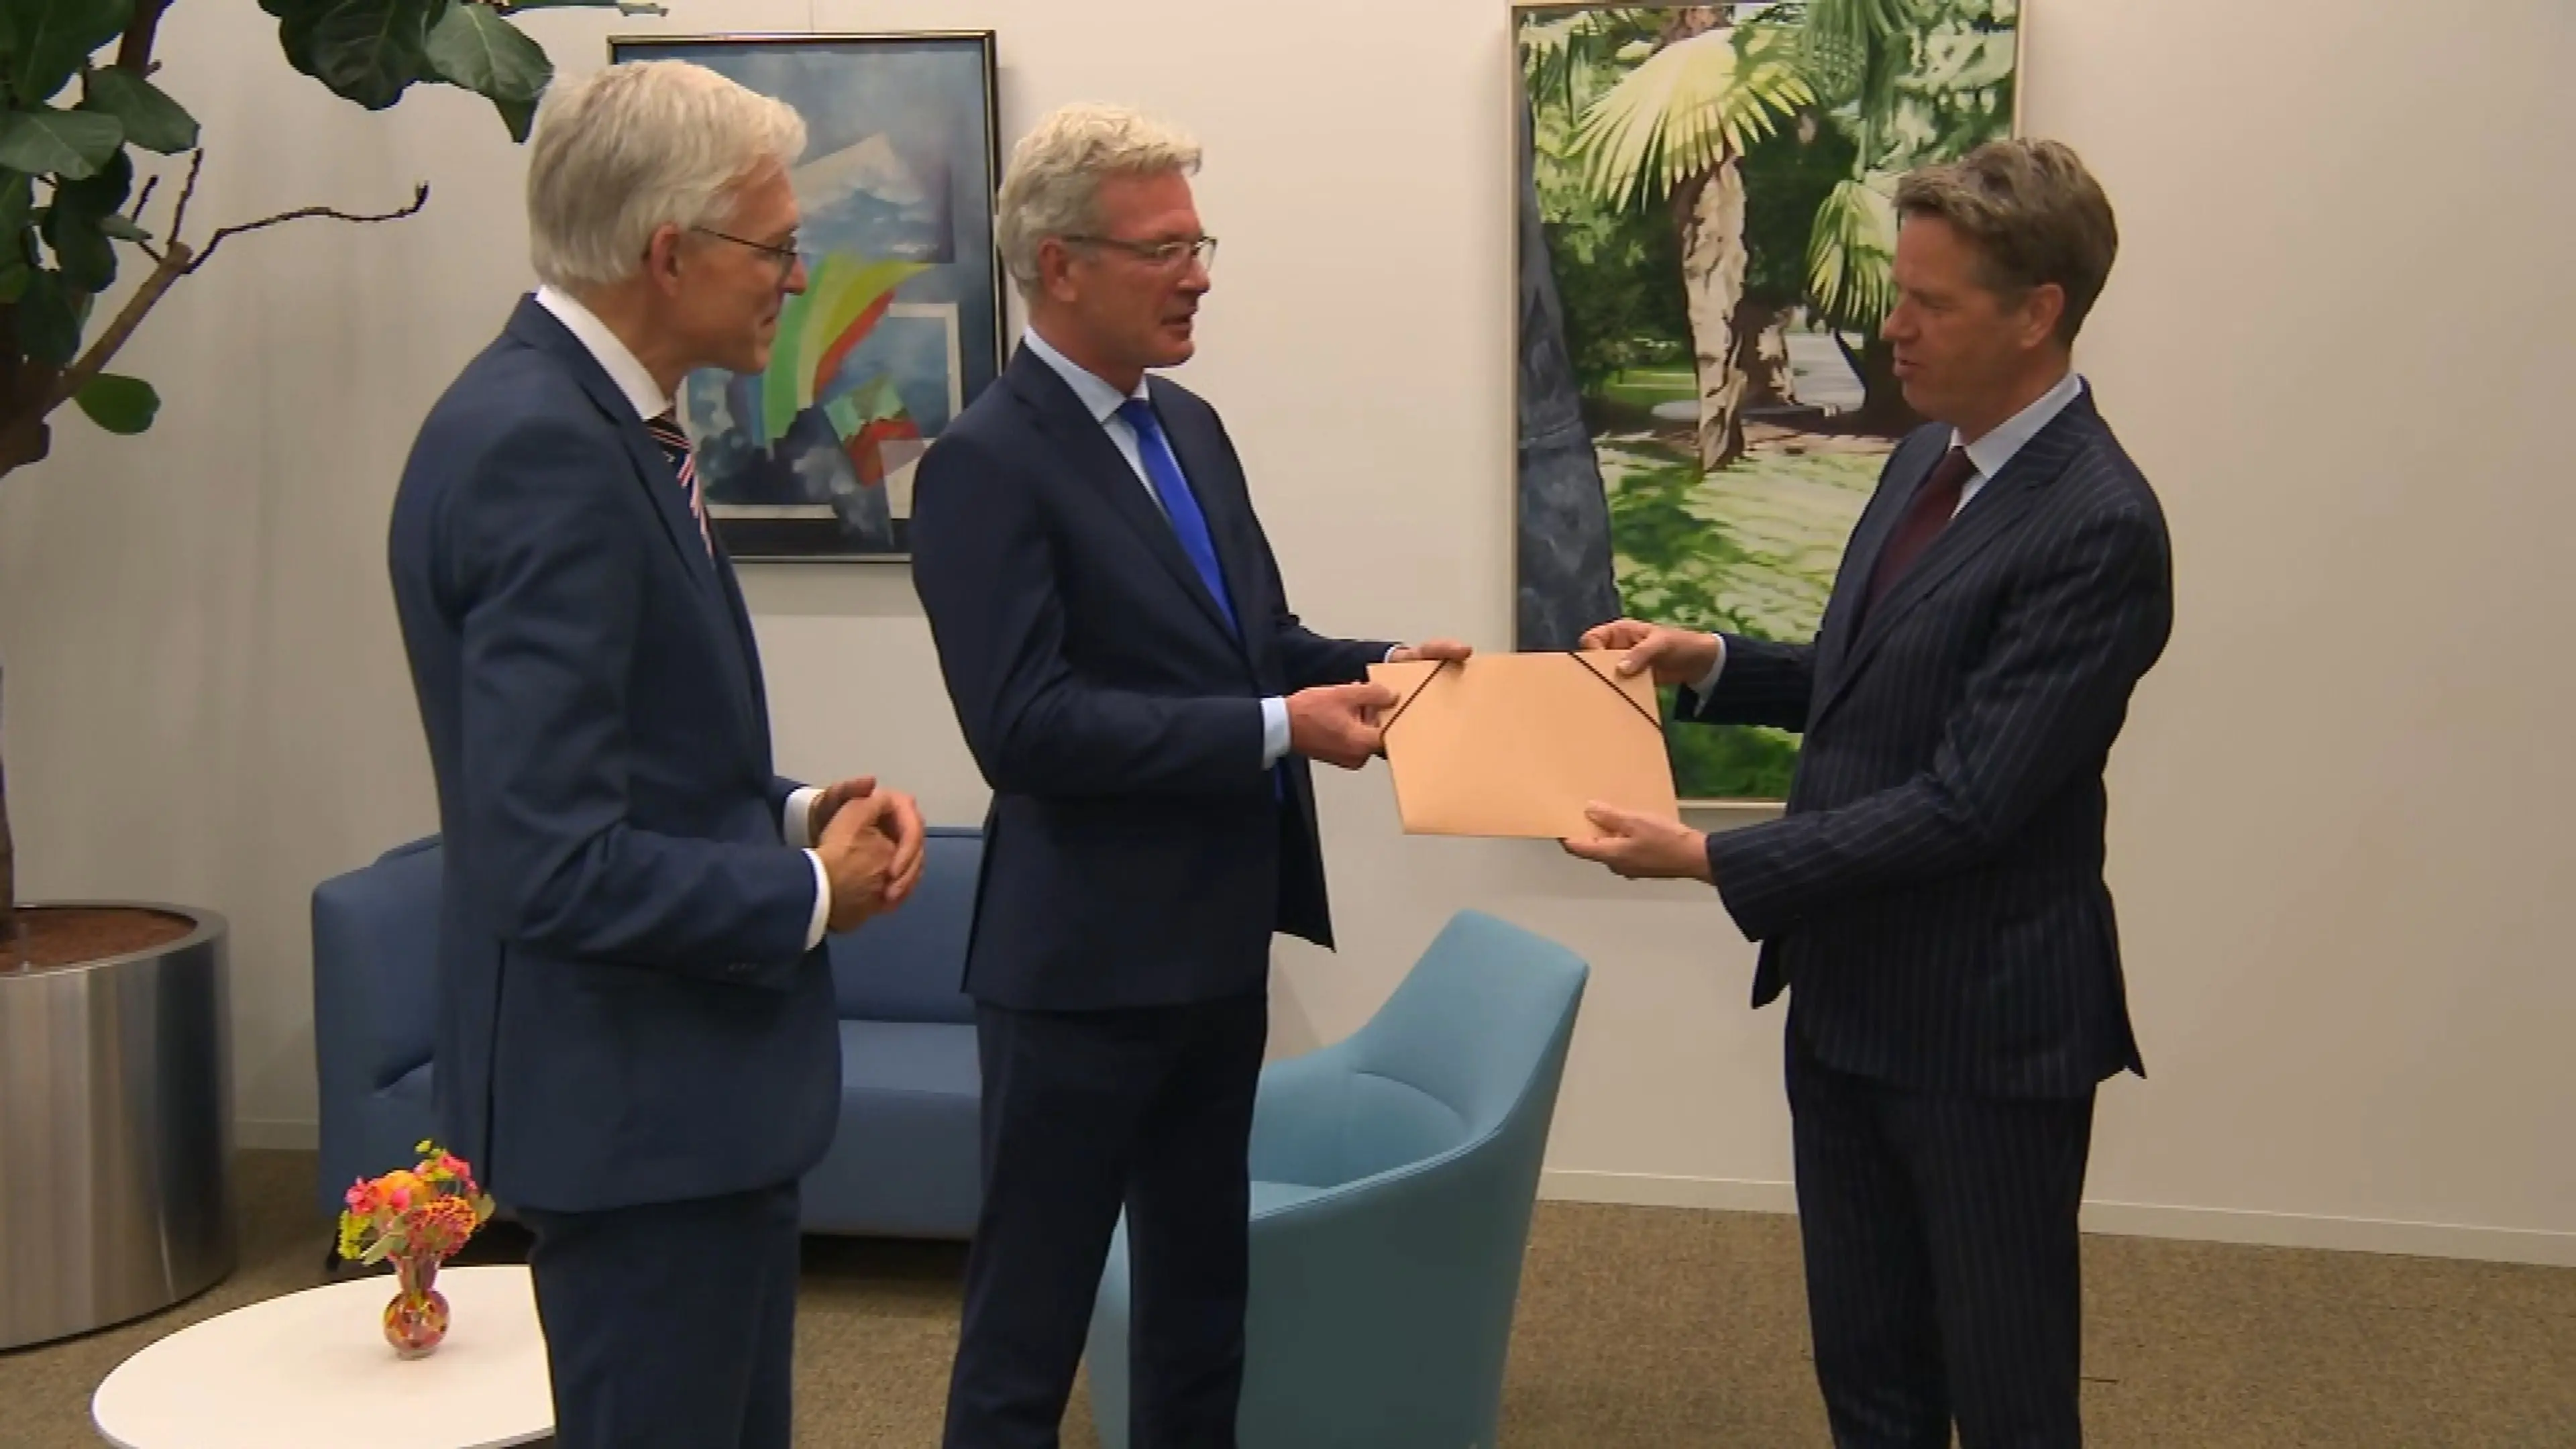 The new political agreement is given to the Speaker of the Dutch House of Representatives.